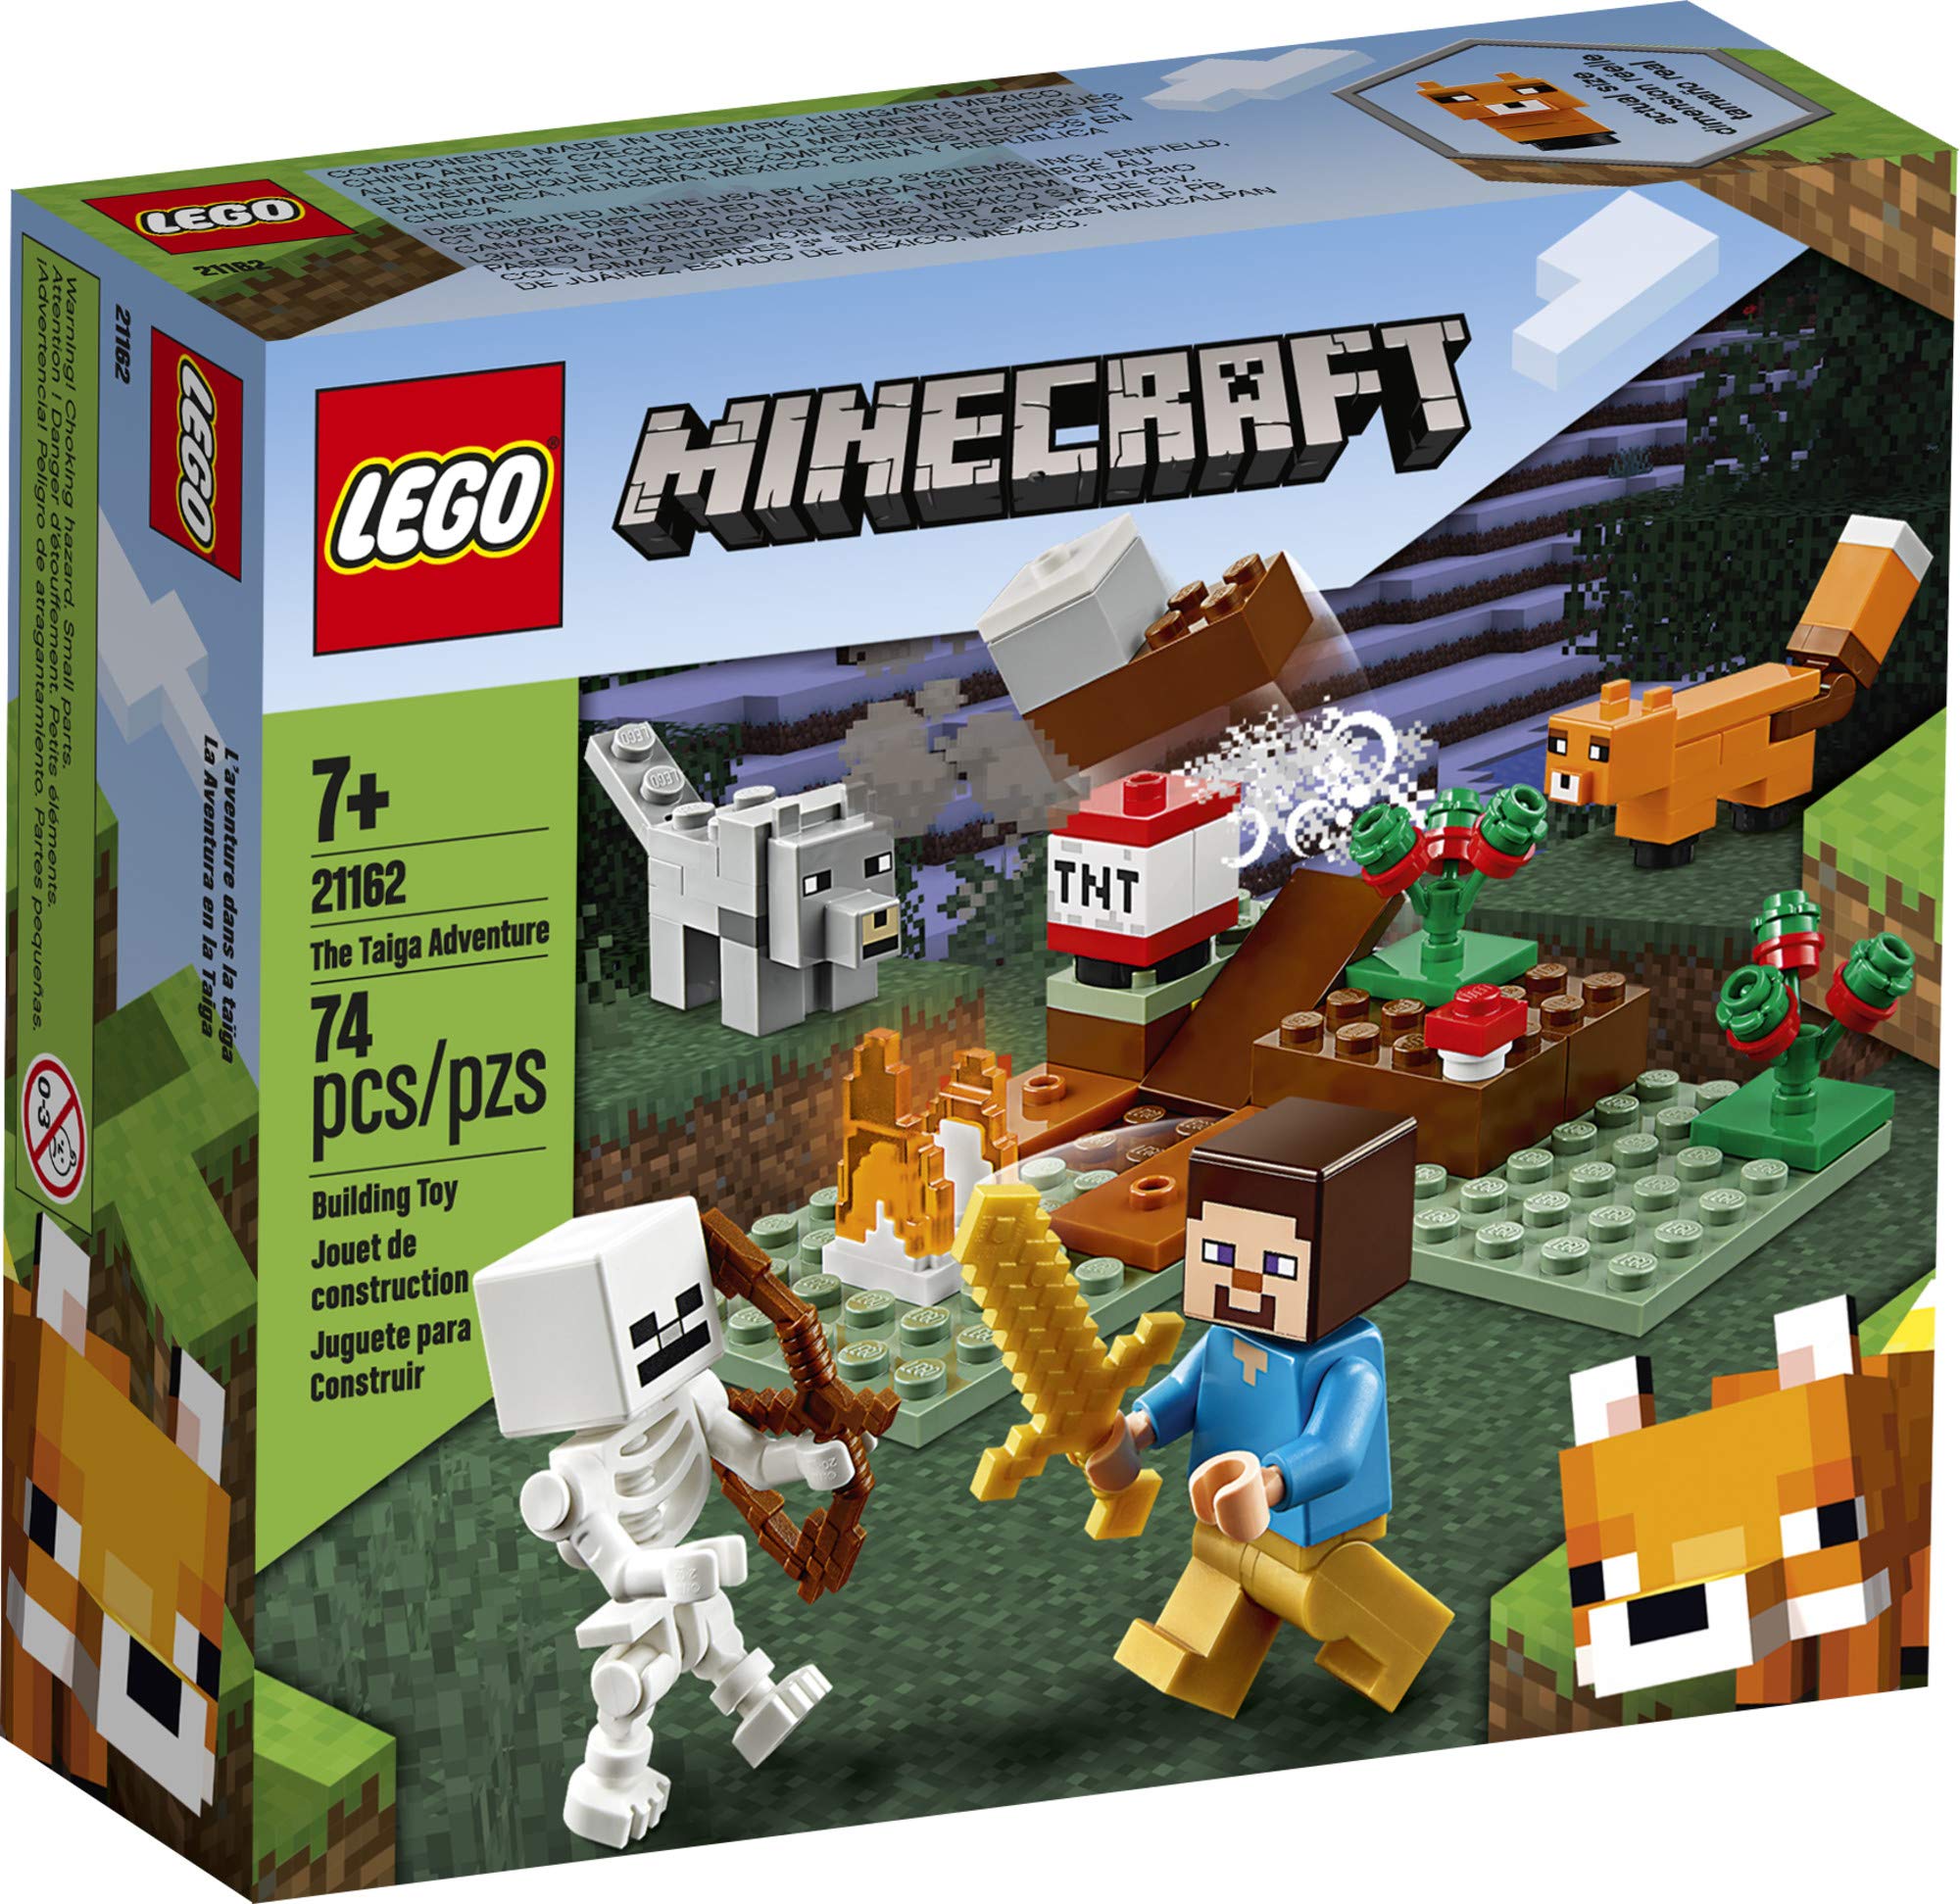 LEGO Minecraft The Taiga Adventure 21162 Brick Building Toy for Kids Who Love Minecraft and Imaginative Play (74 Pieces)